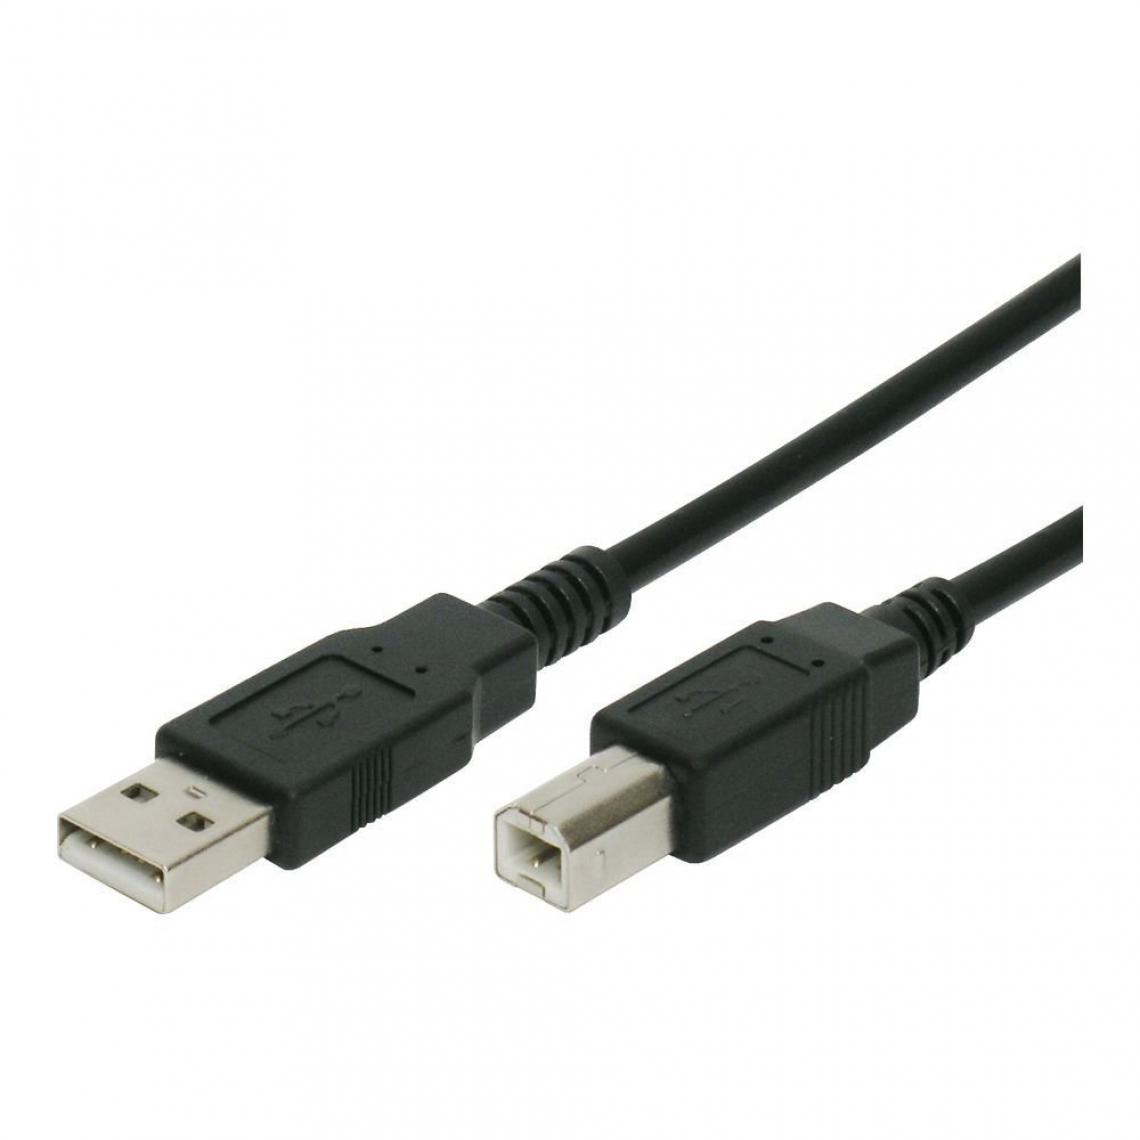 Ineck - INECK - Cable USB 2.0 - type A-male vers B-male - noir ï¿½ 3m - Câble antenne